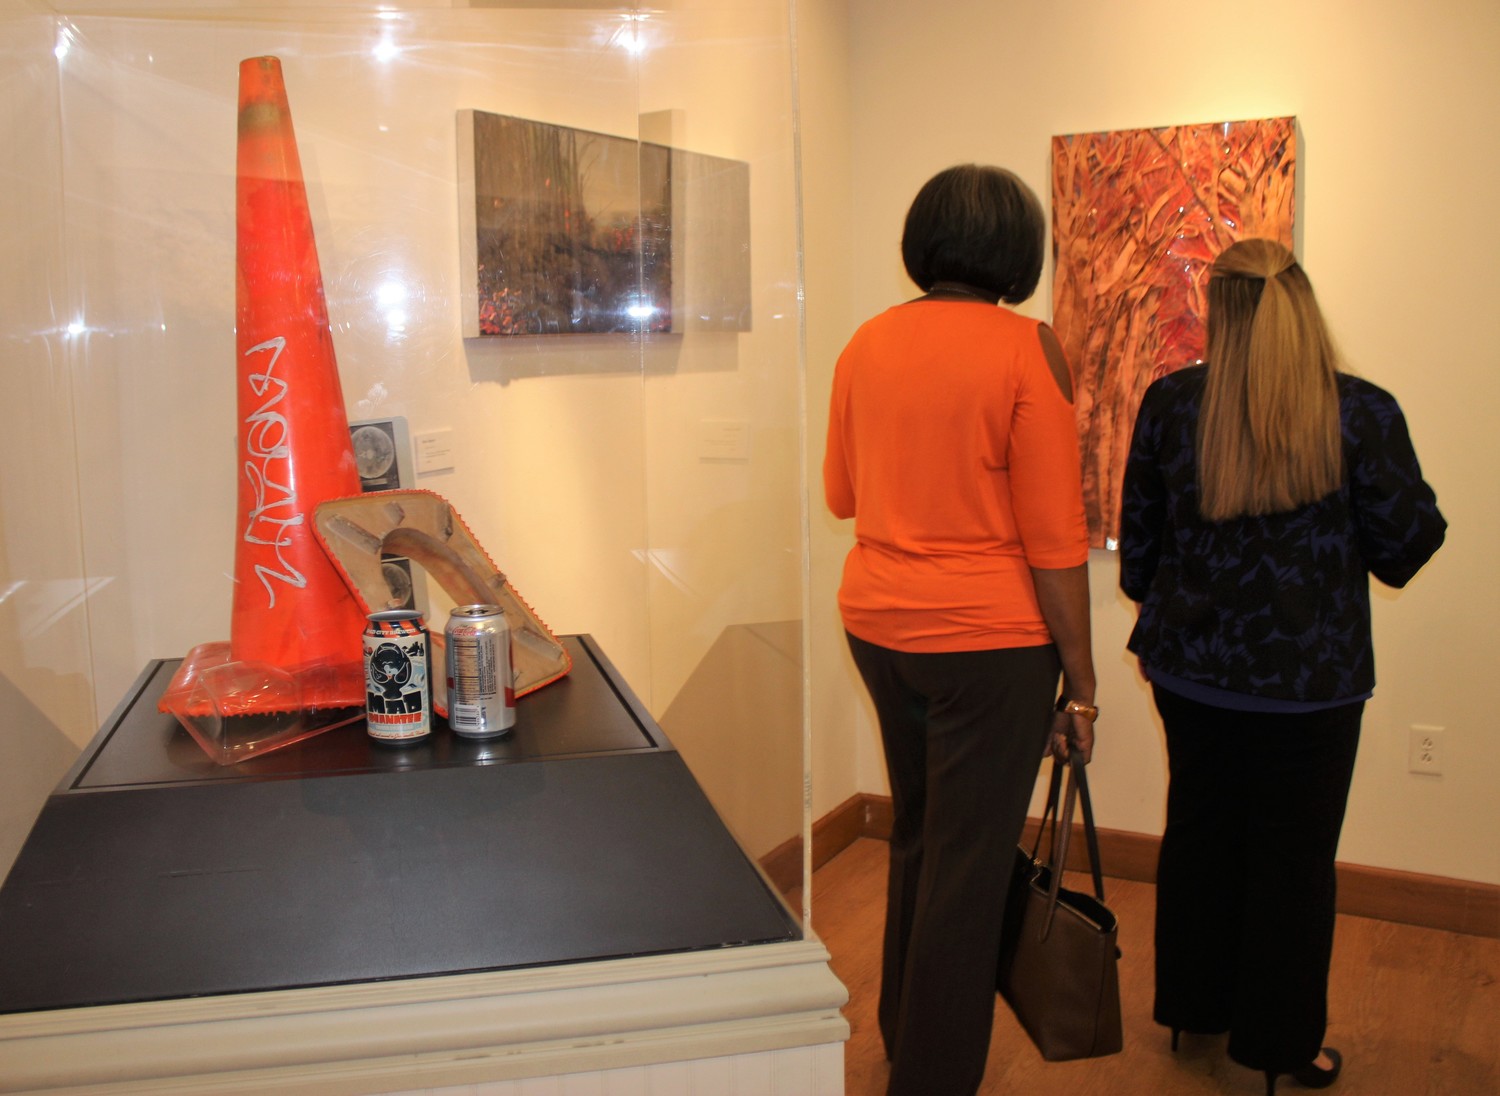 The works of local artist Lana Shuttleworth, made primarily from recycled traffic cones, are displayed in the museum’s gallery.